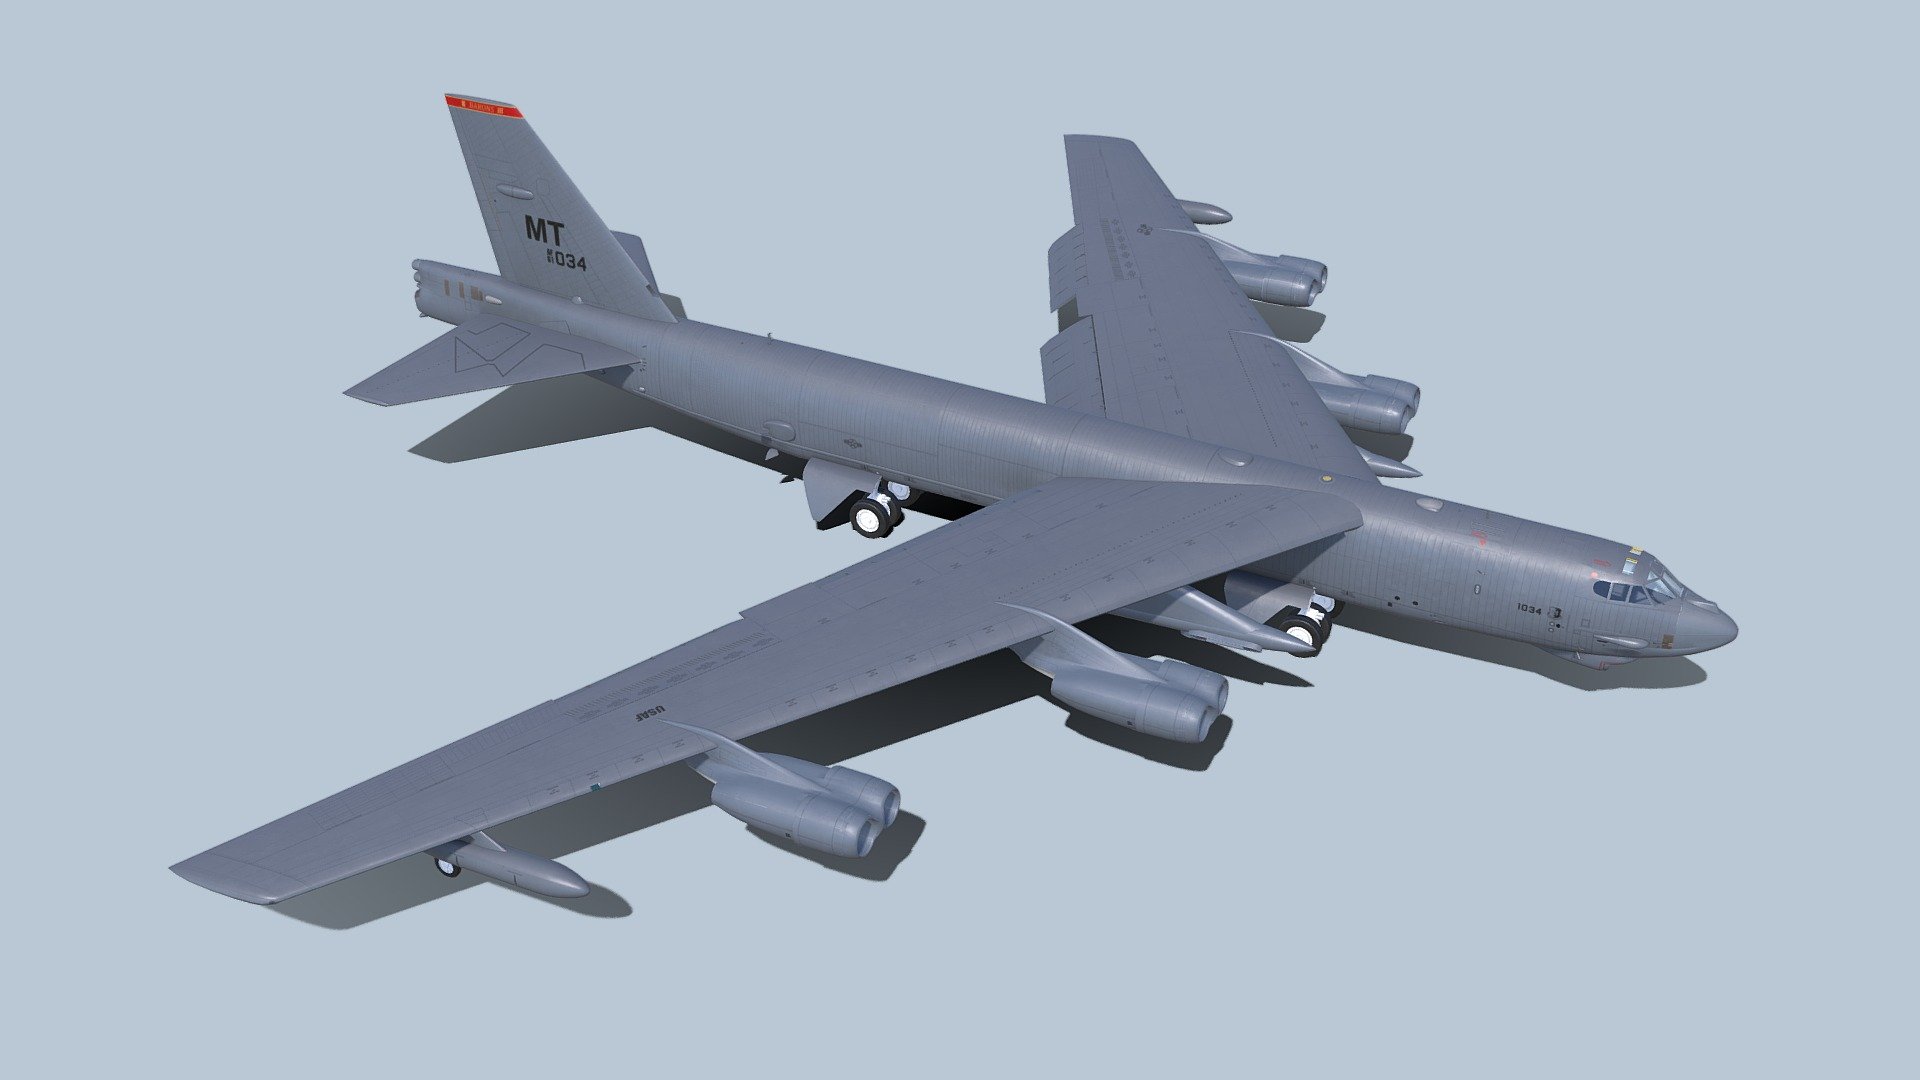 Purchase link is here https://www.artstation.com/artwork/3qqVYD

The Boeing B-52 Stratofortress is an American long-range, subsonic, jet-powered strategic bomber. It has been operated by the United States Air Force (USAF) since the 1950s. The bomber is capable of carrying up to 70,000 pounds (32,000 kg) of weapons, and has a typical combat range of more than 8,800 miles (14,080 km) without aerial refueling.
The B-52H had the same crew and structural changes as the B-52G. The most significant upgrade was the switch to TF33-P-3 turbofan engines.  The ECM and avionics were updated, a new fire control system was fitted, and the rear defensive armament was changed from machine guns to a 20 mm M61 Vulcan cannon (later removed in 1991–94).   The aircraft's first flight occurred on 10 July 1960, and it entered service on 9 May 1961. This is the only variant still in use. A total of 102 B-52Hs were built. The last production aircraft, B-52H AF Serial No. 61-0040, left the factory on 26 October 1962 3d model